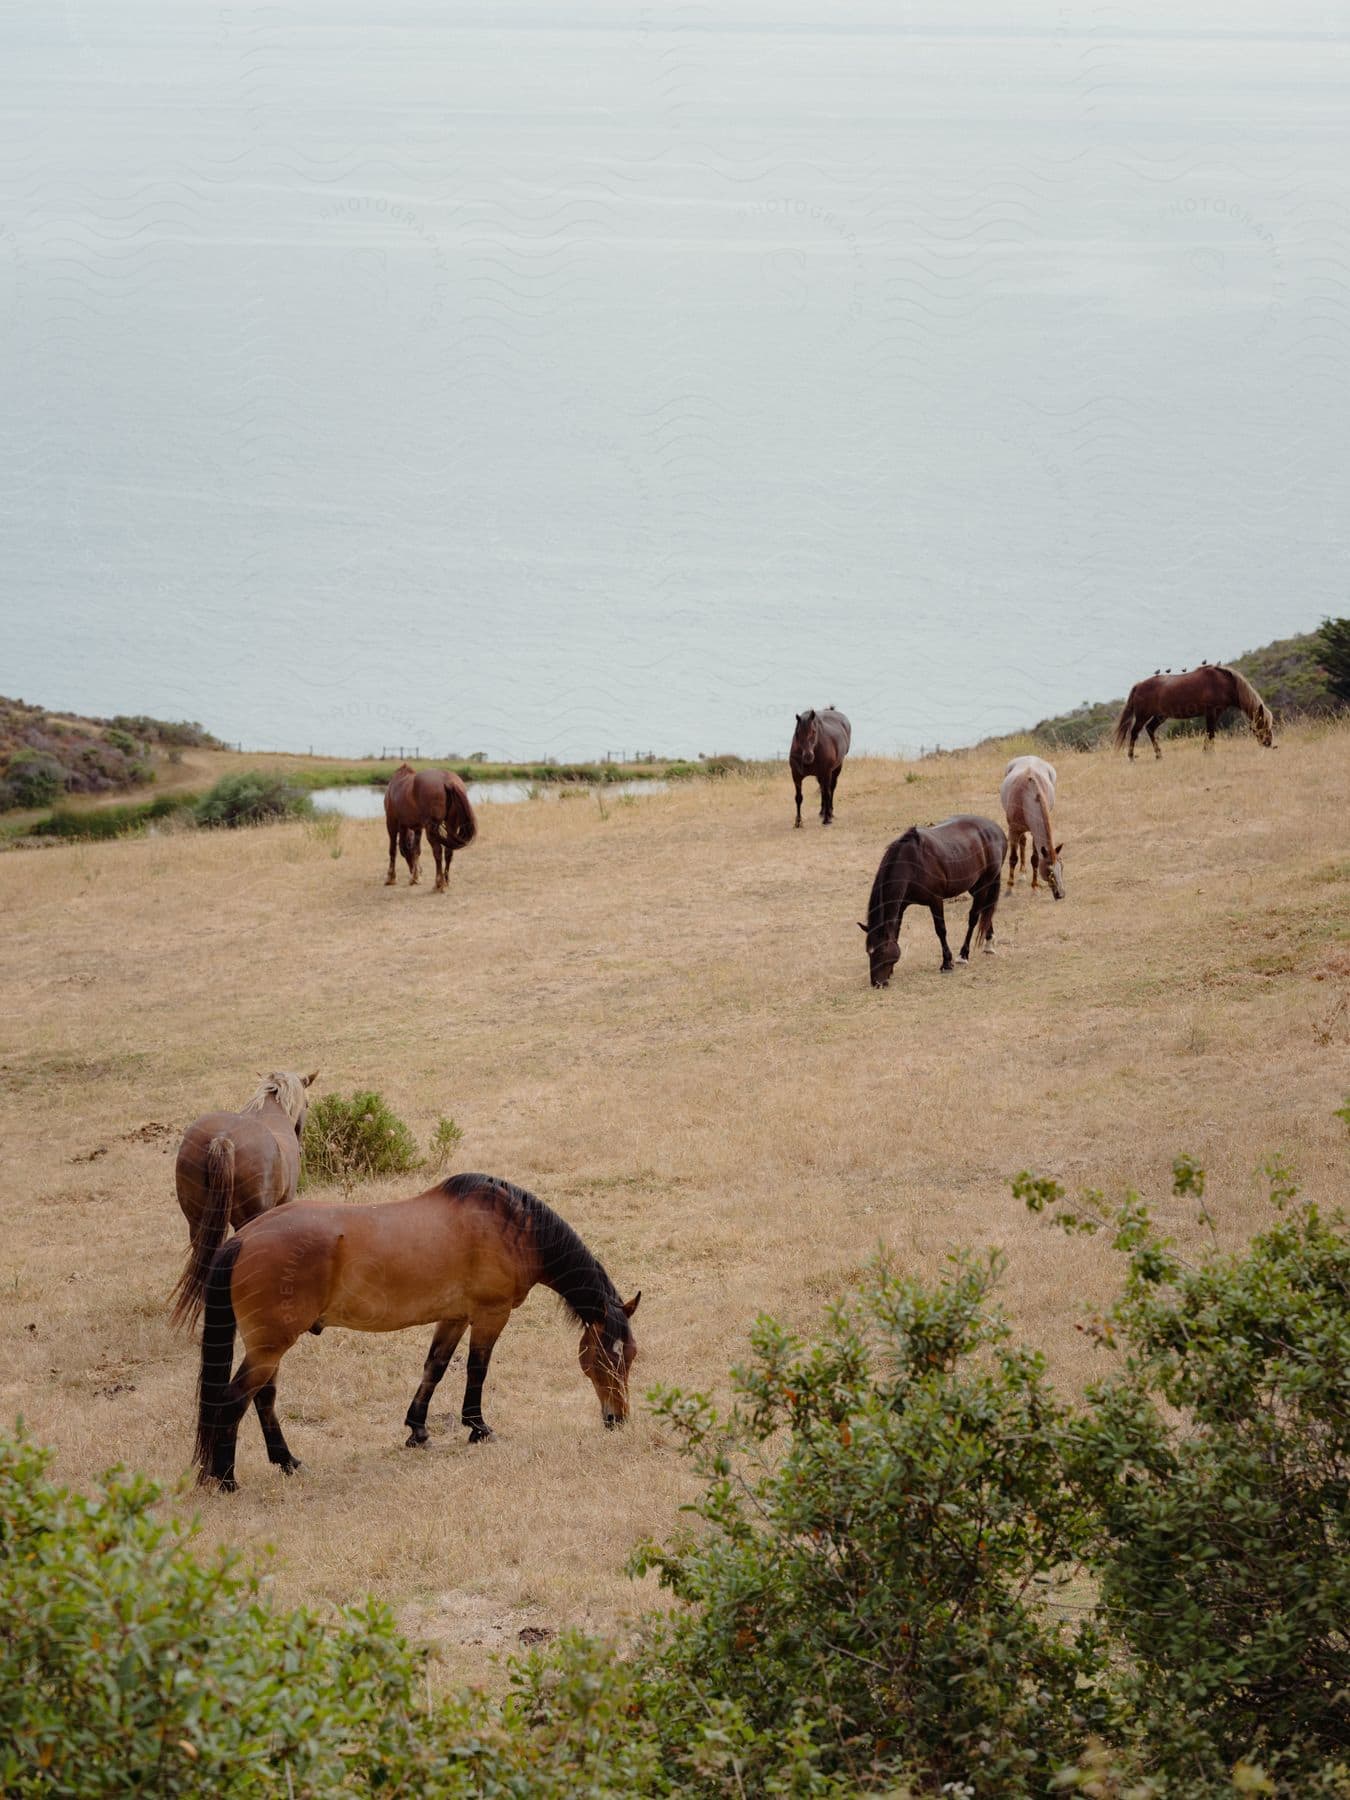 Horses munch on brown grass by the sea, framed by trees in front.